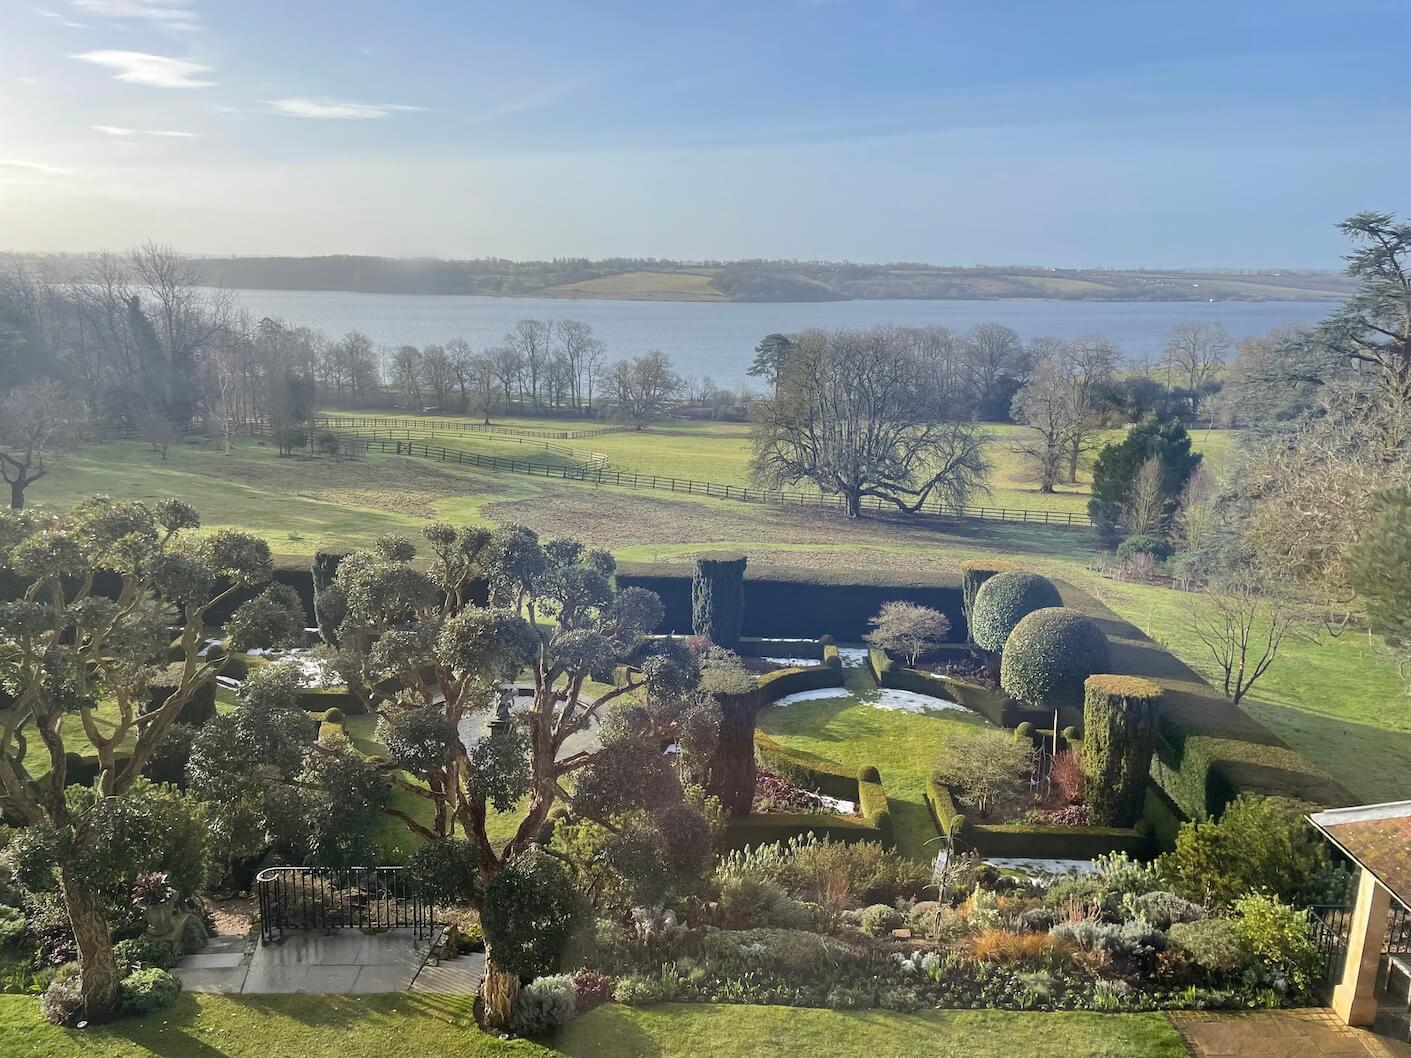 View of Hambleton Hall's gardens and Rutland Water in the background